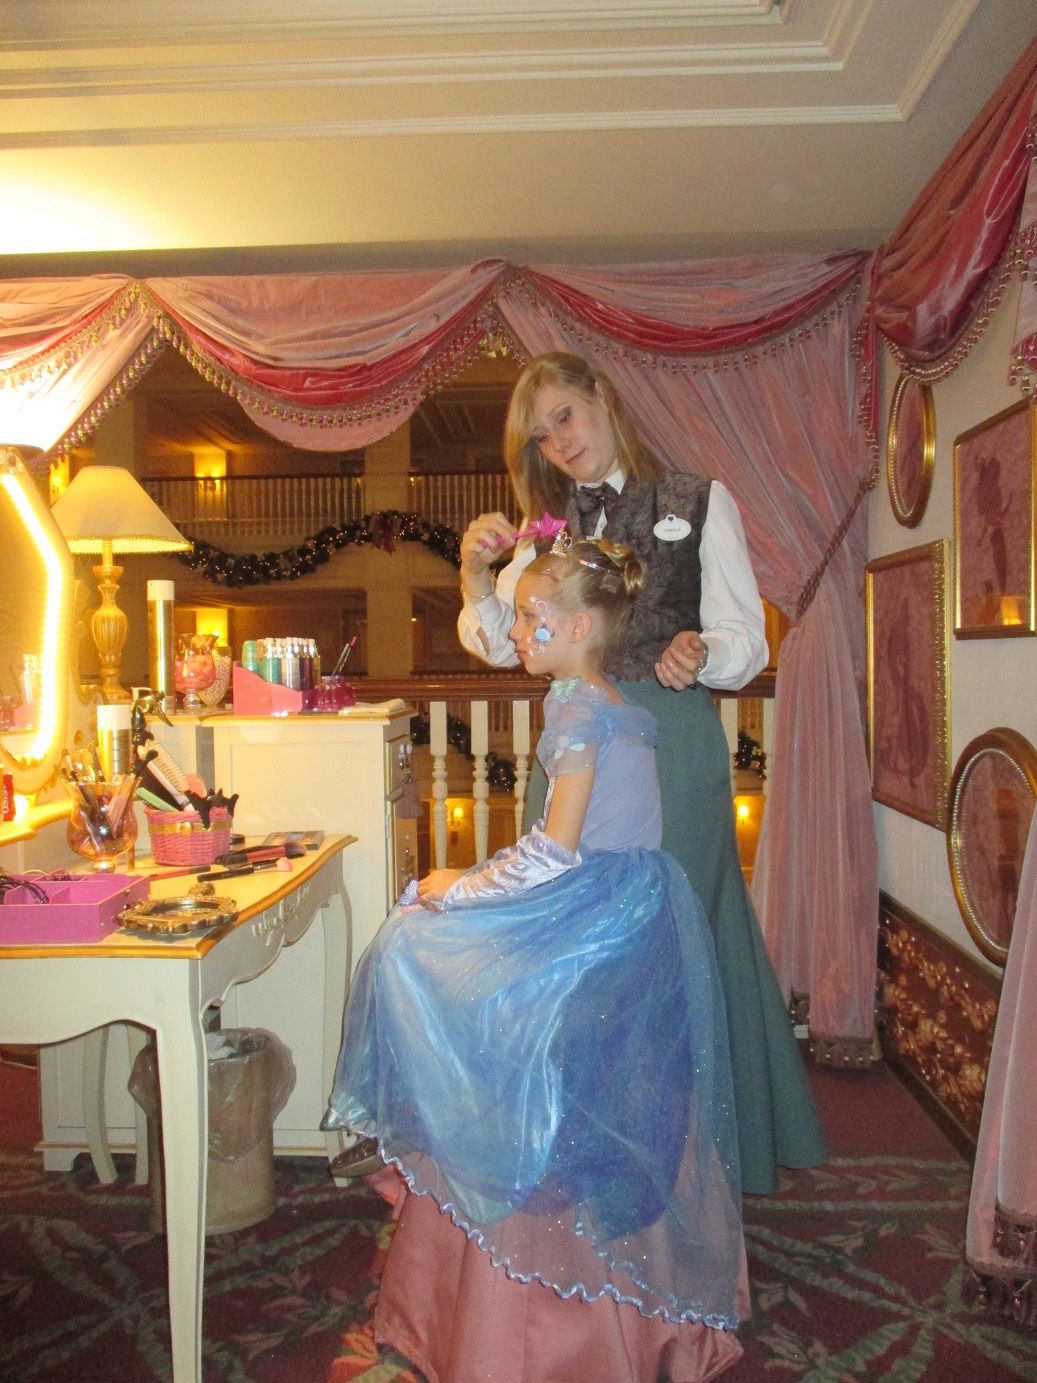 Princess for a Day at Disneyland Paris - added pixie dust